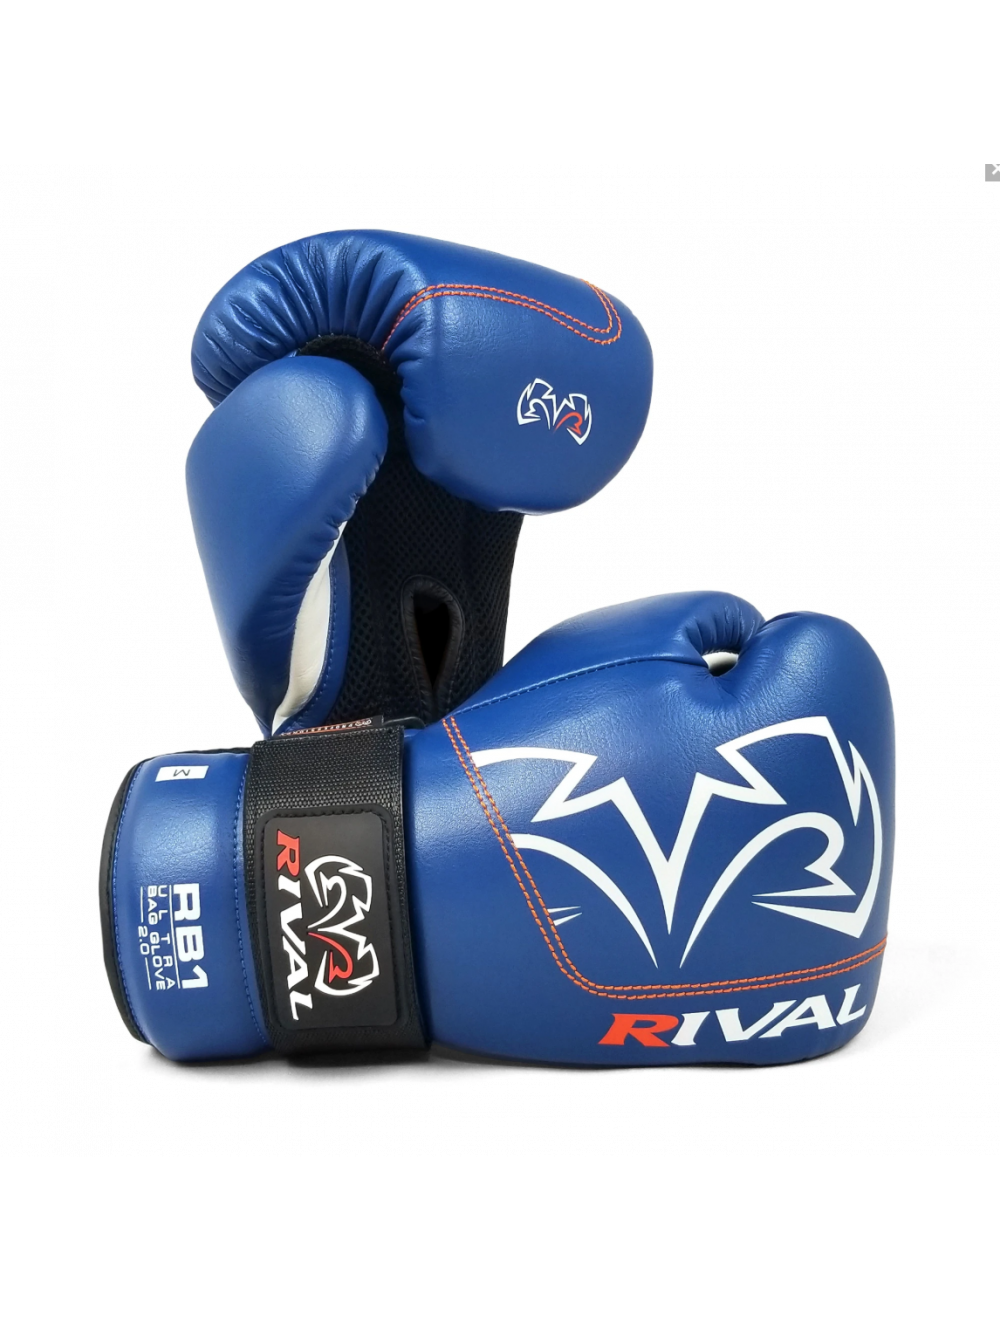 Rival RB1 Ultra Boxing Bag Gloves Adult Workout Gloves Gym Training Glove M L XL 